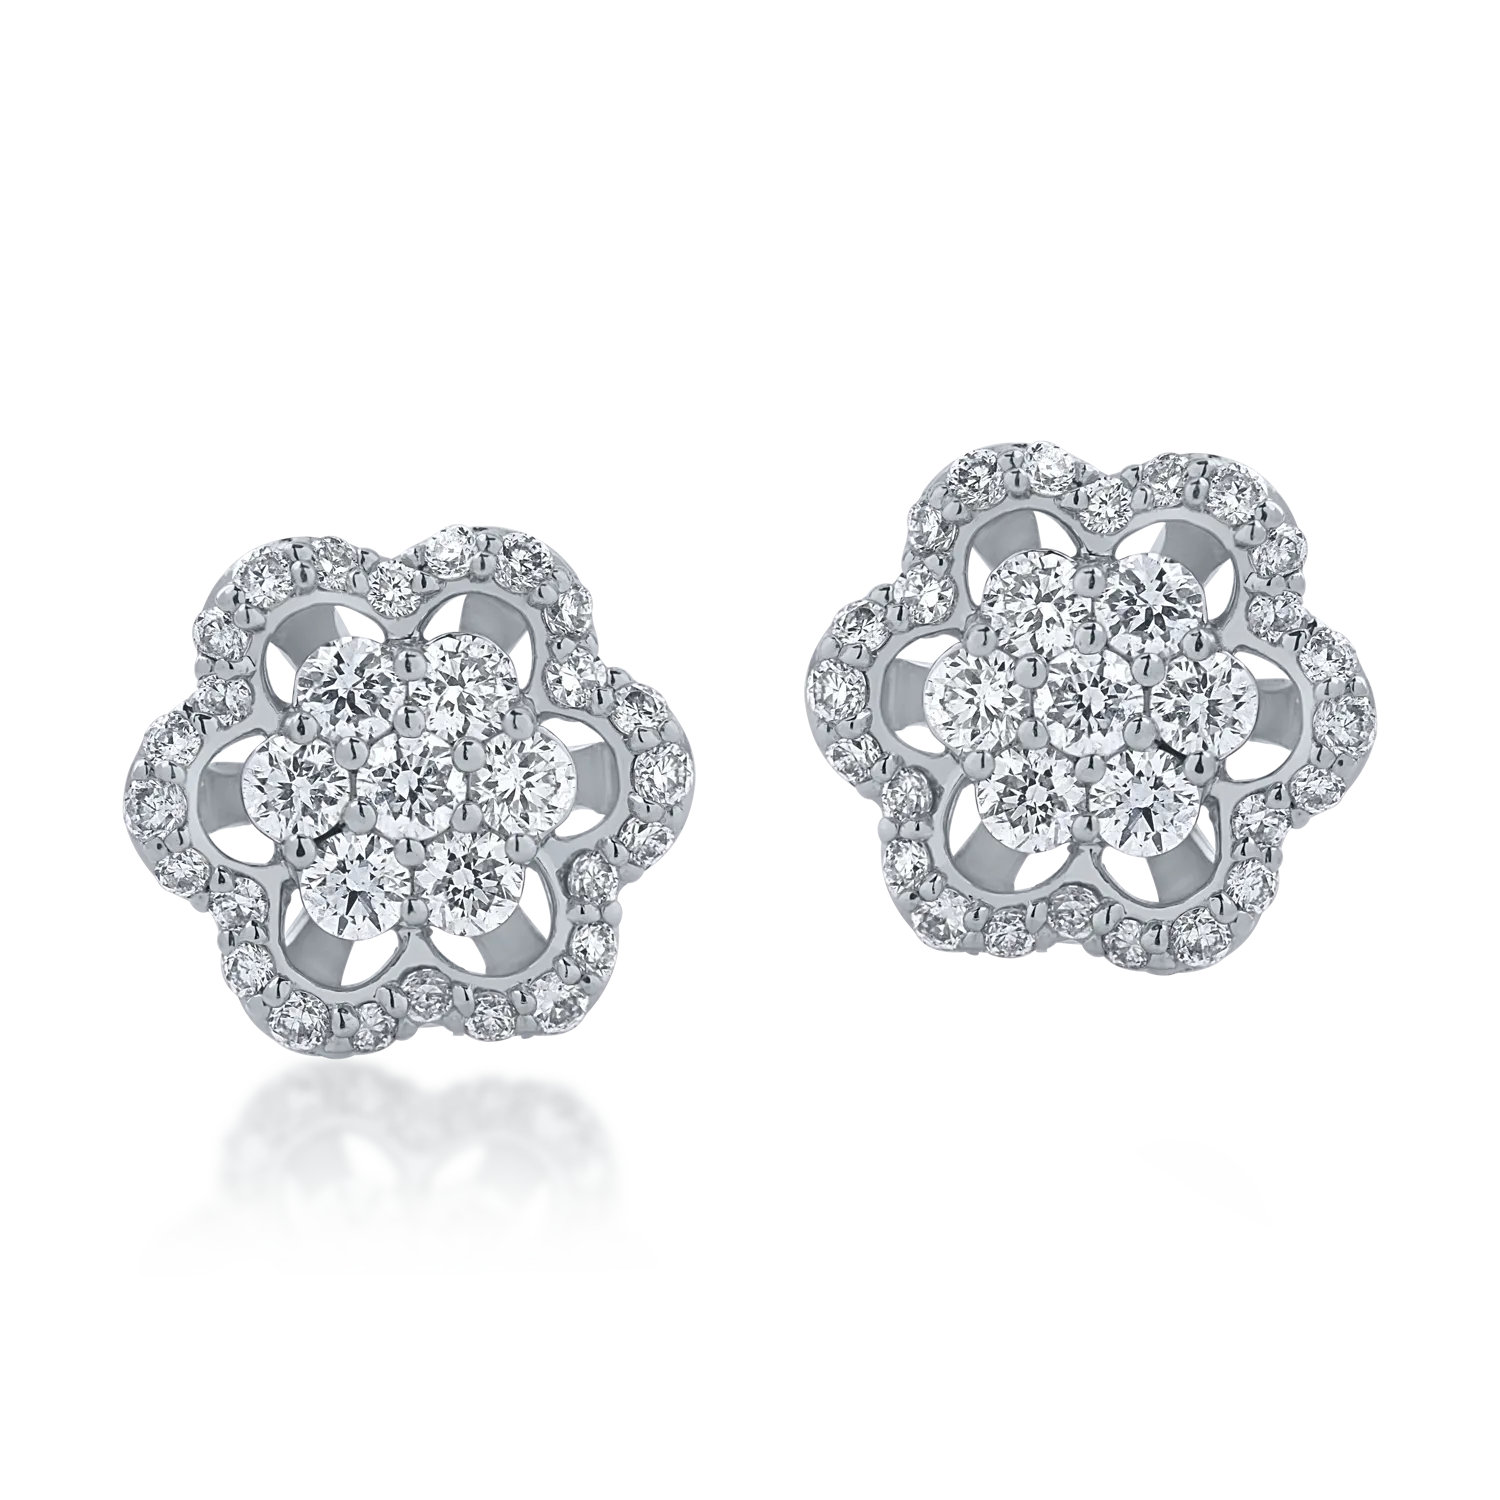 White gold flower earrings with 0.34ct diamonds